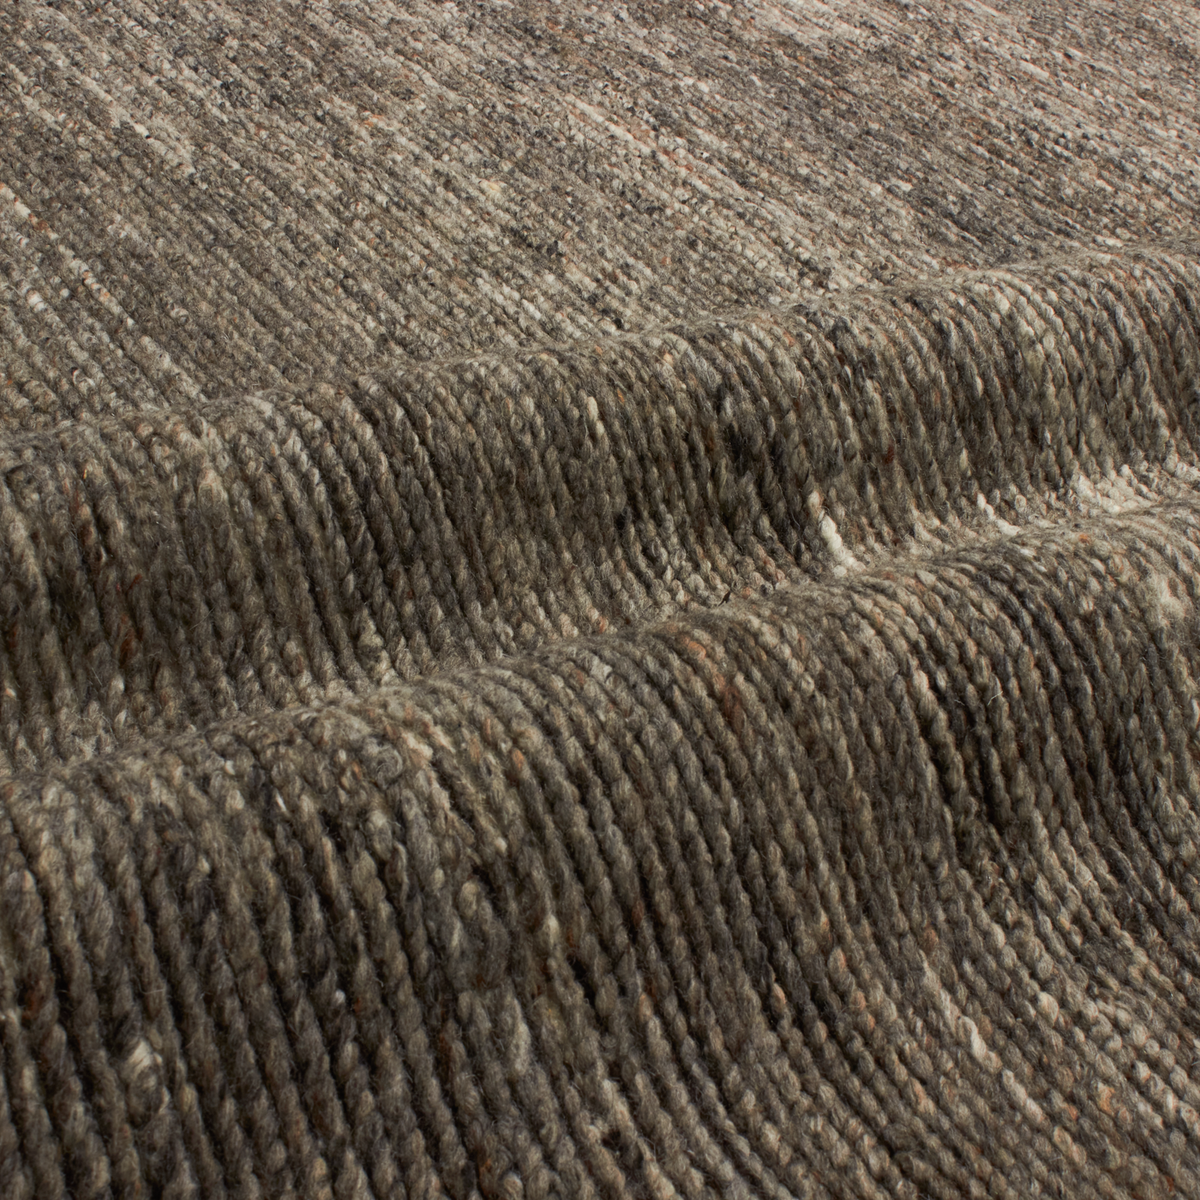 At Mkt, we believe rug design is a fine balance of modernity and tradition.